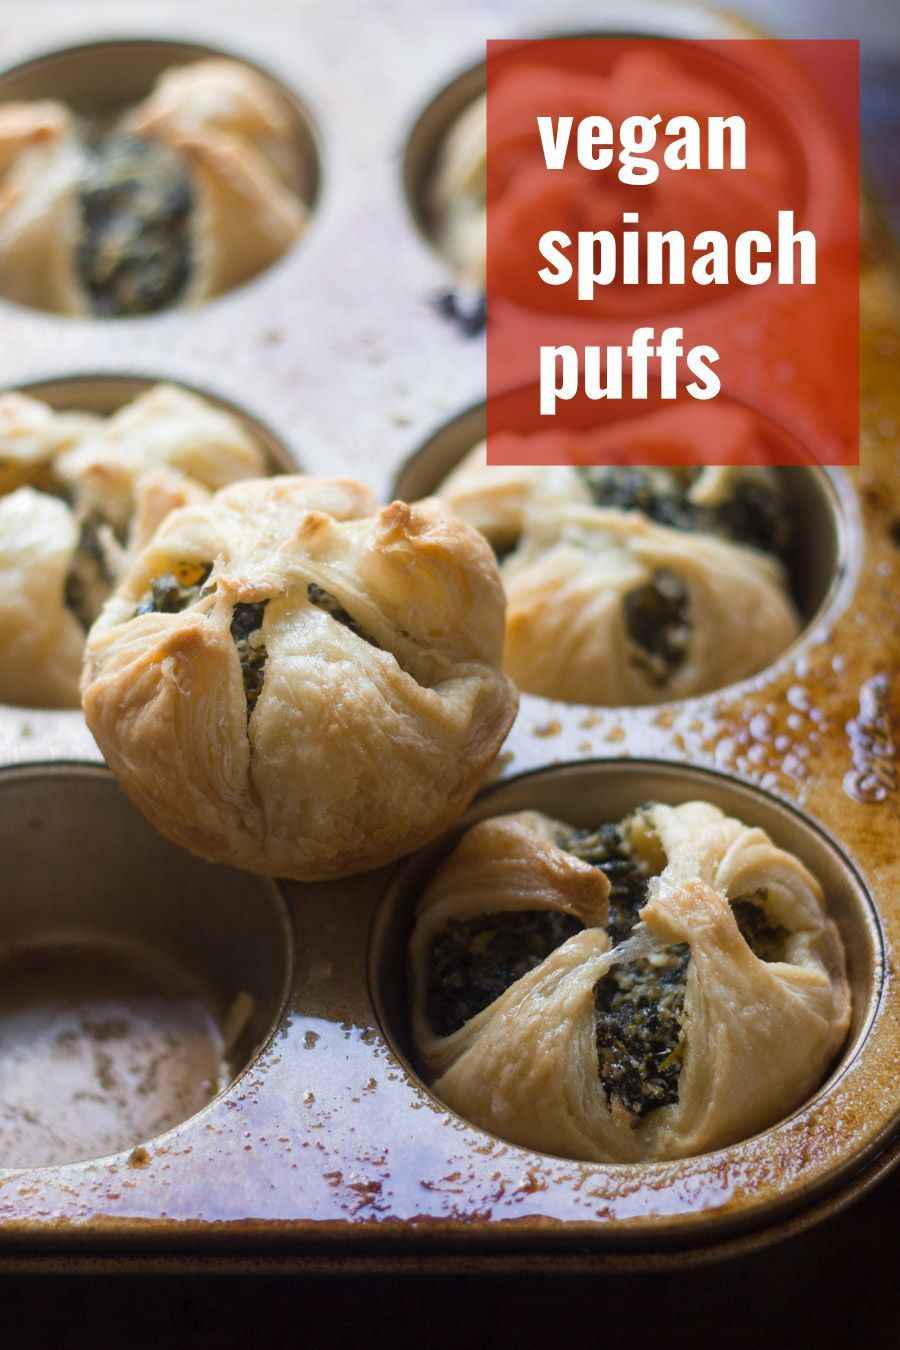 Puff Pastry Shells Recipes Appetizers
 Puff pastry shells are stuffed with a mix of spinach